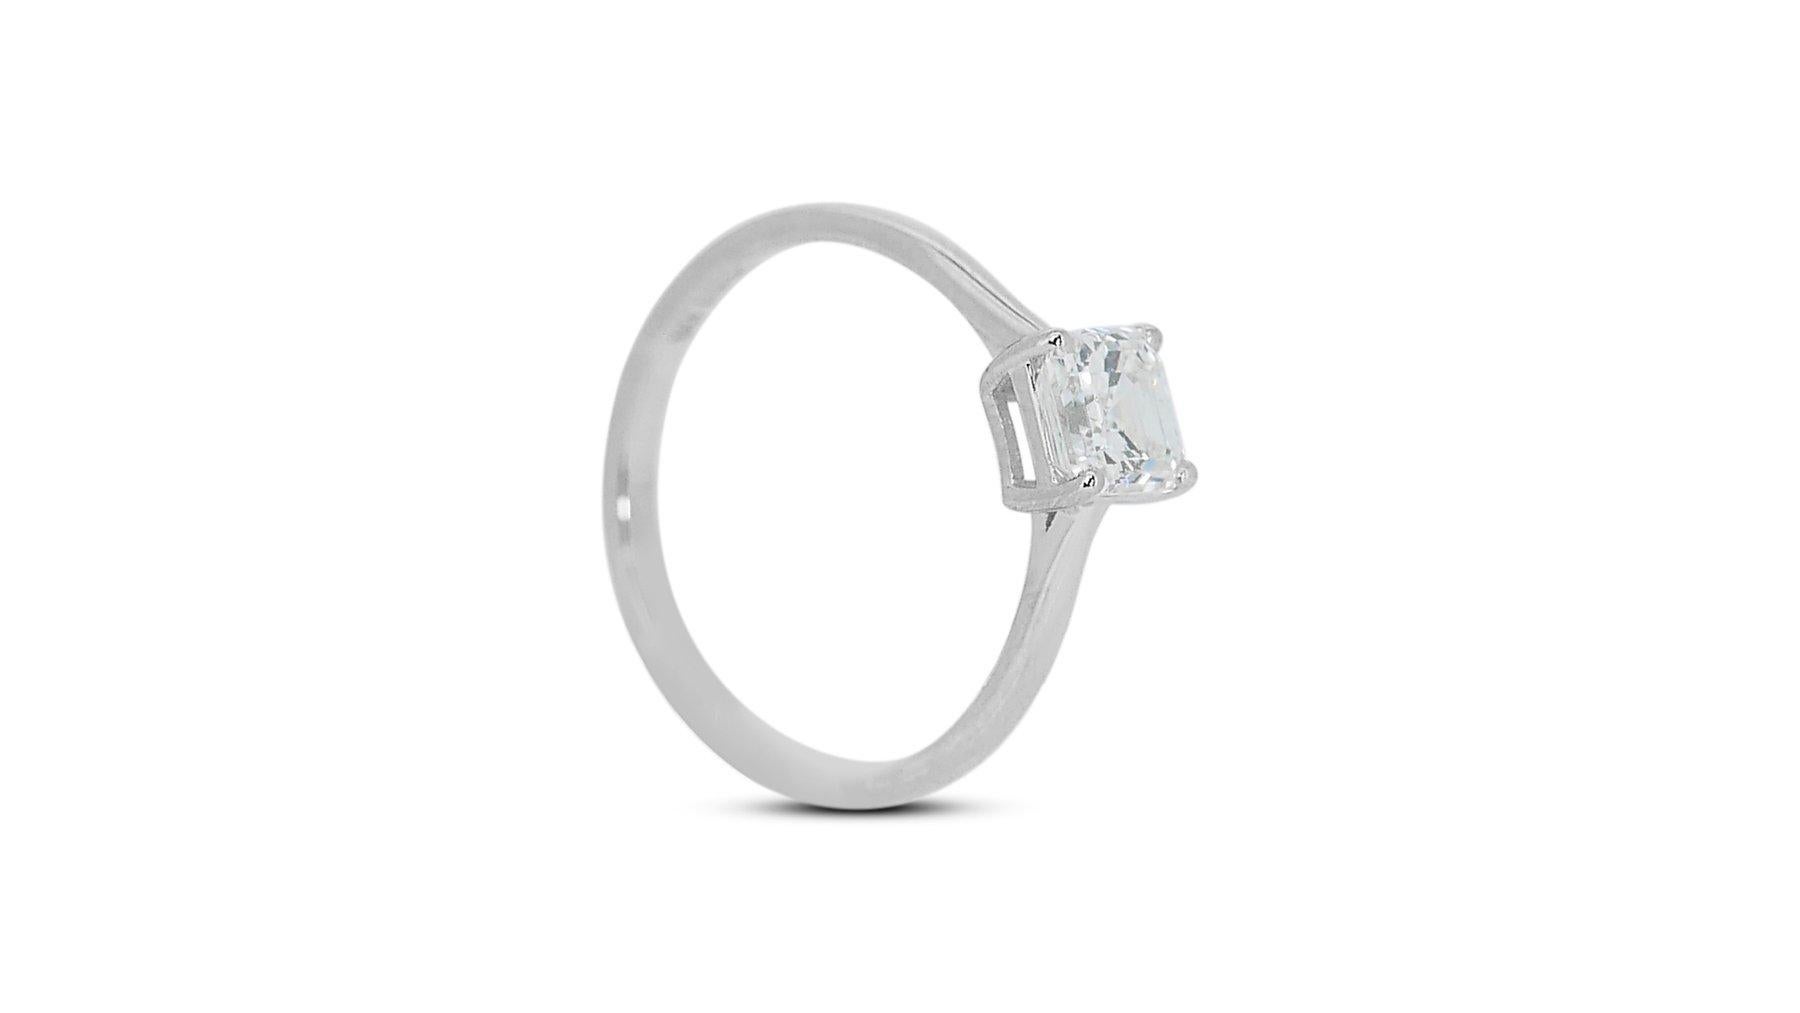 Luminous 1.00ct Diamond Solitare Ring in 18k White Gold - GIA Certified

Elevate your style with this sophisticated 18k white gold diamond solitaire ring, showcasing a magnificent 1.00-carat square-cut diamond. Certified by GIA, ensuring its